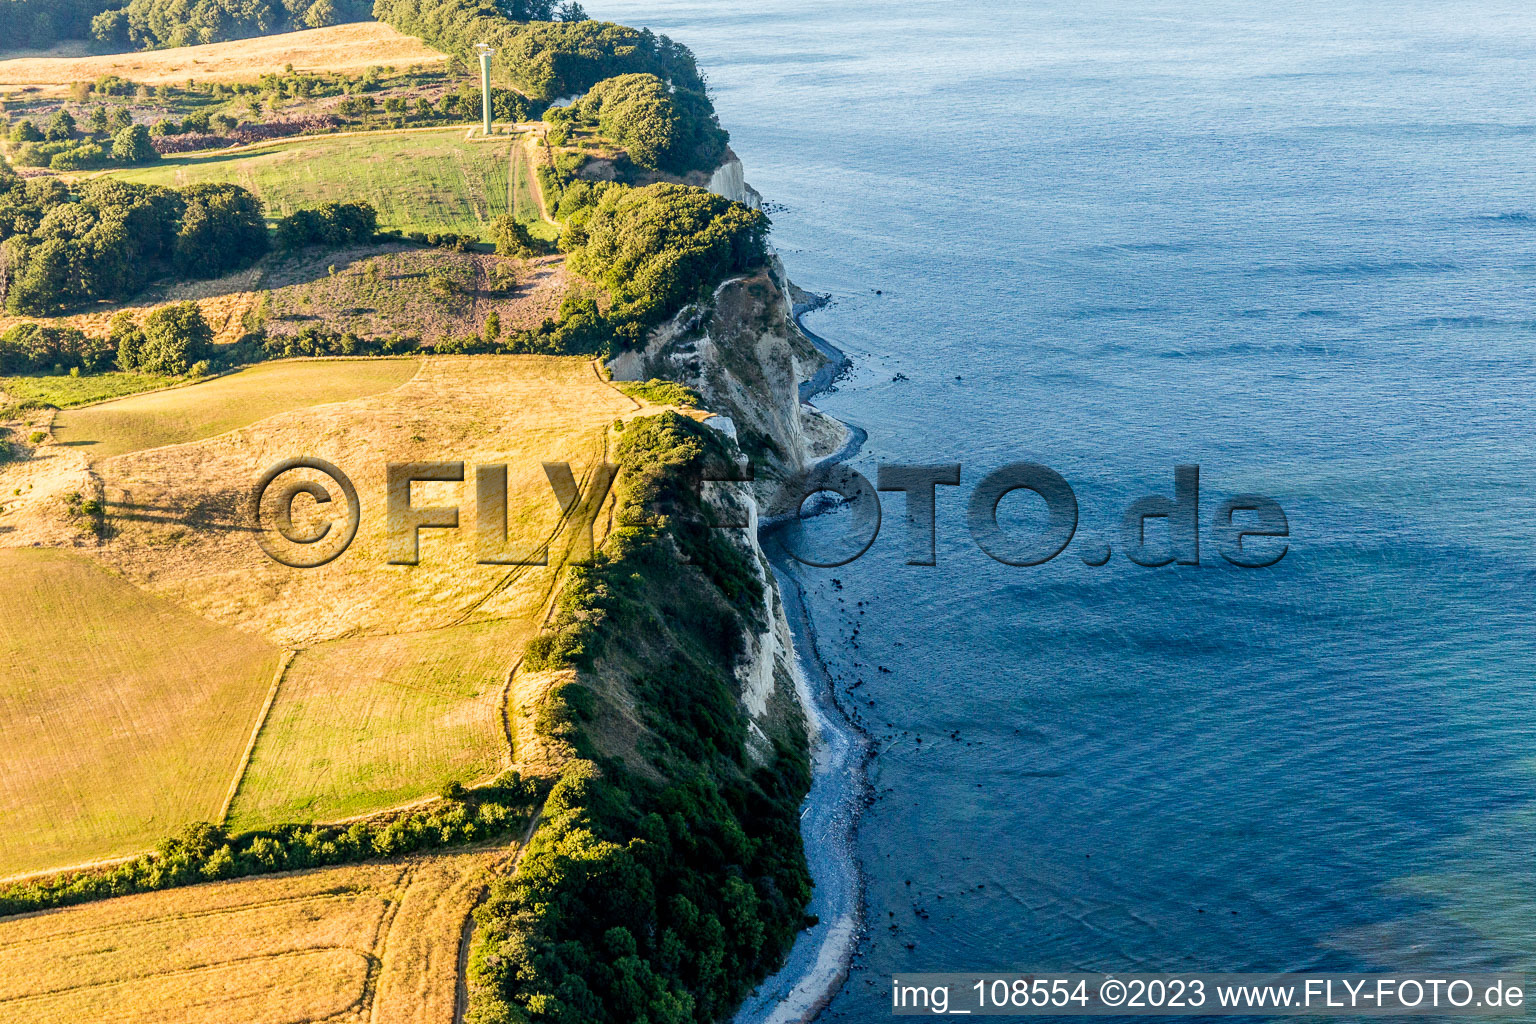 Borre in the state Zealand, Denmark from above